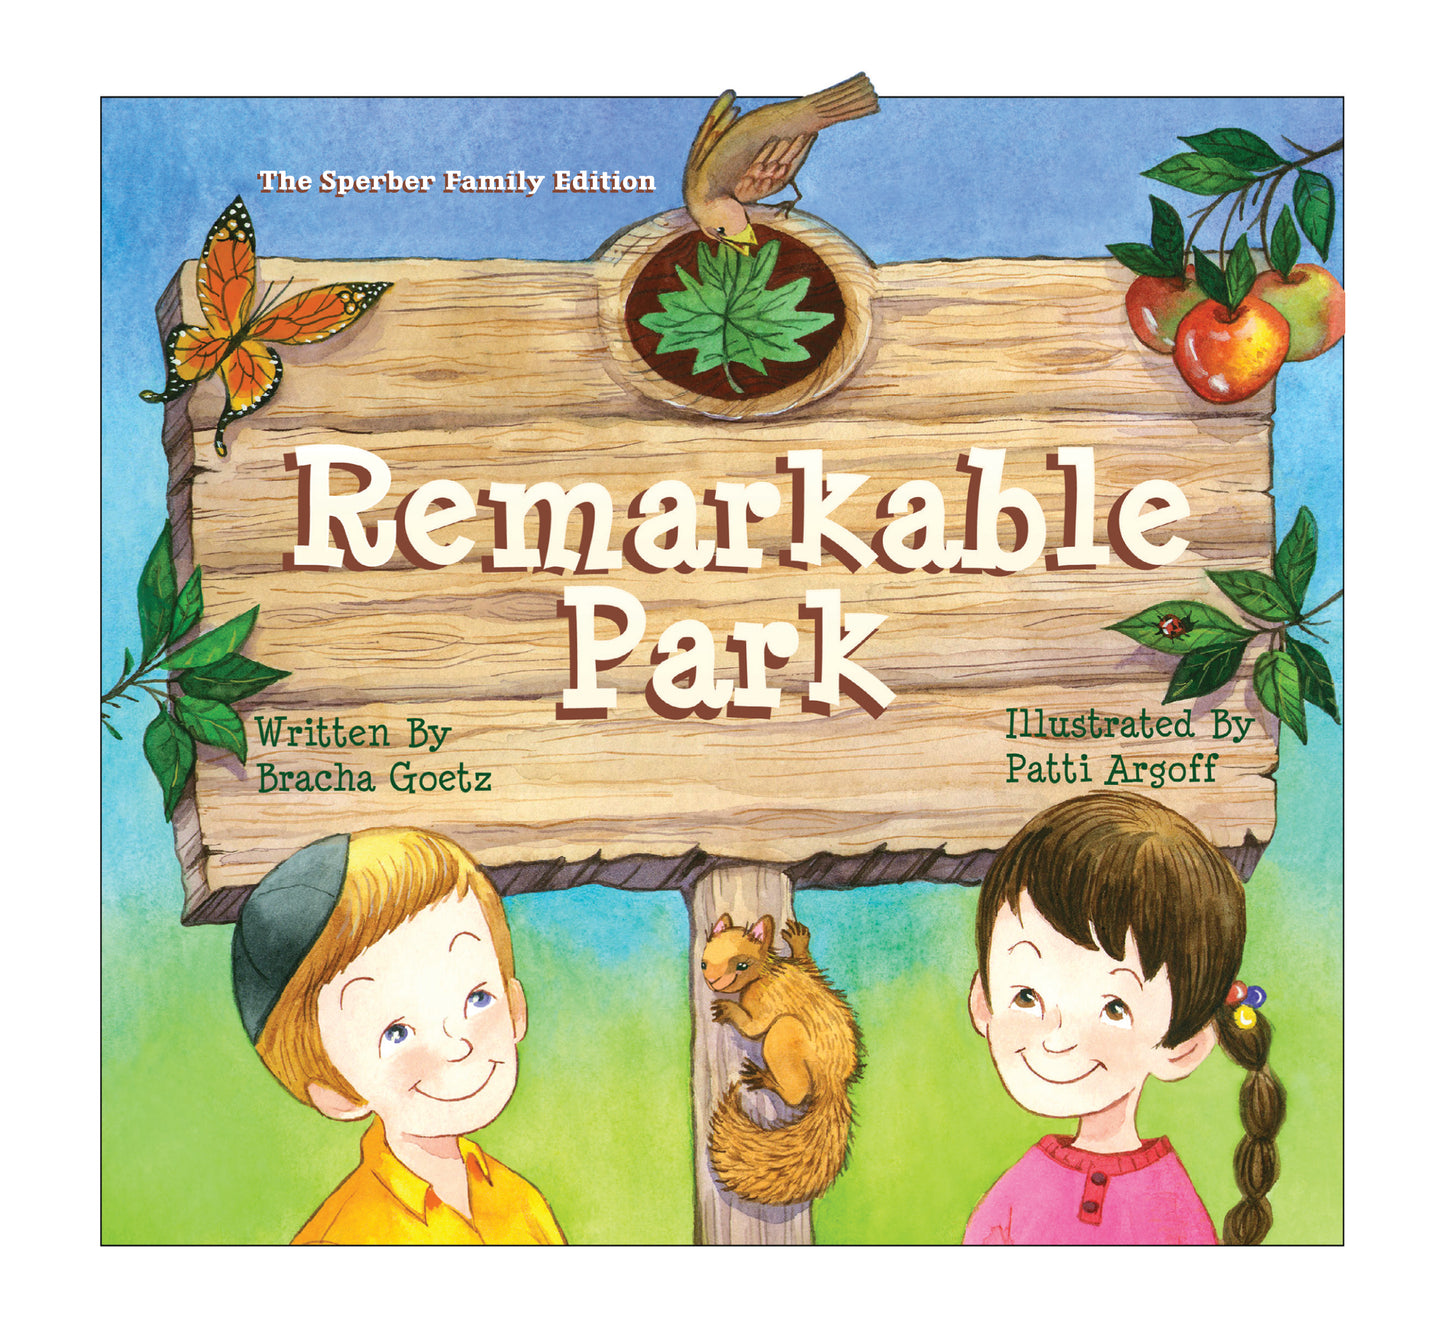 Remarkable Park: Animated Video Download